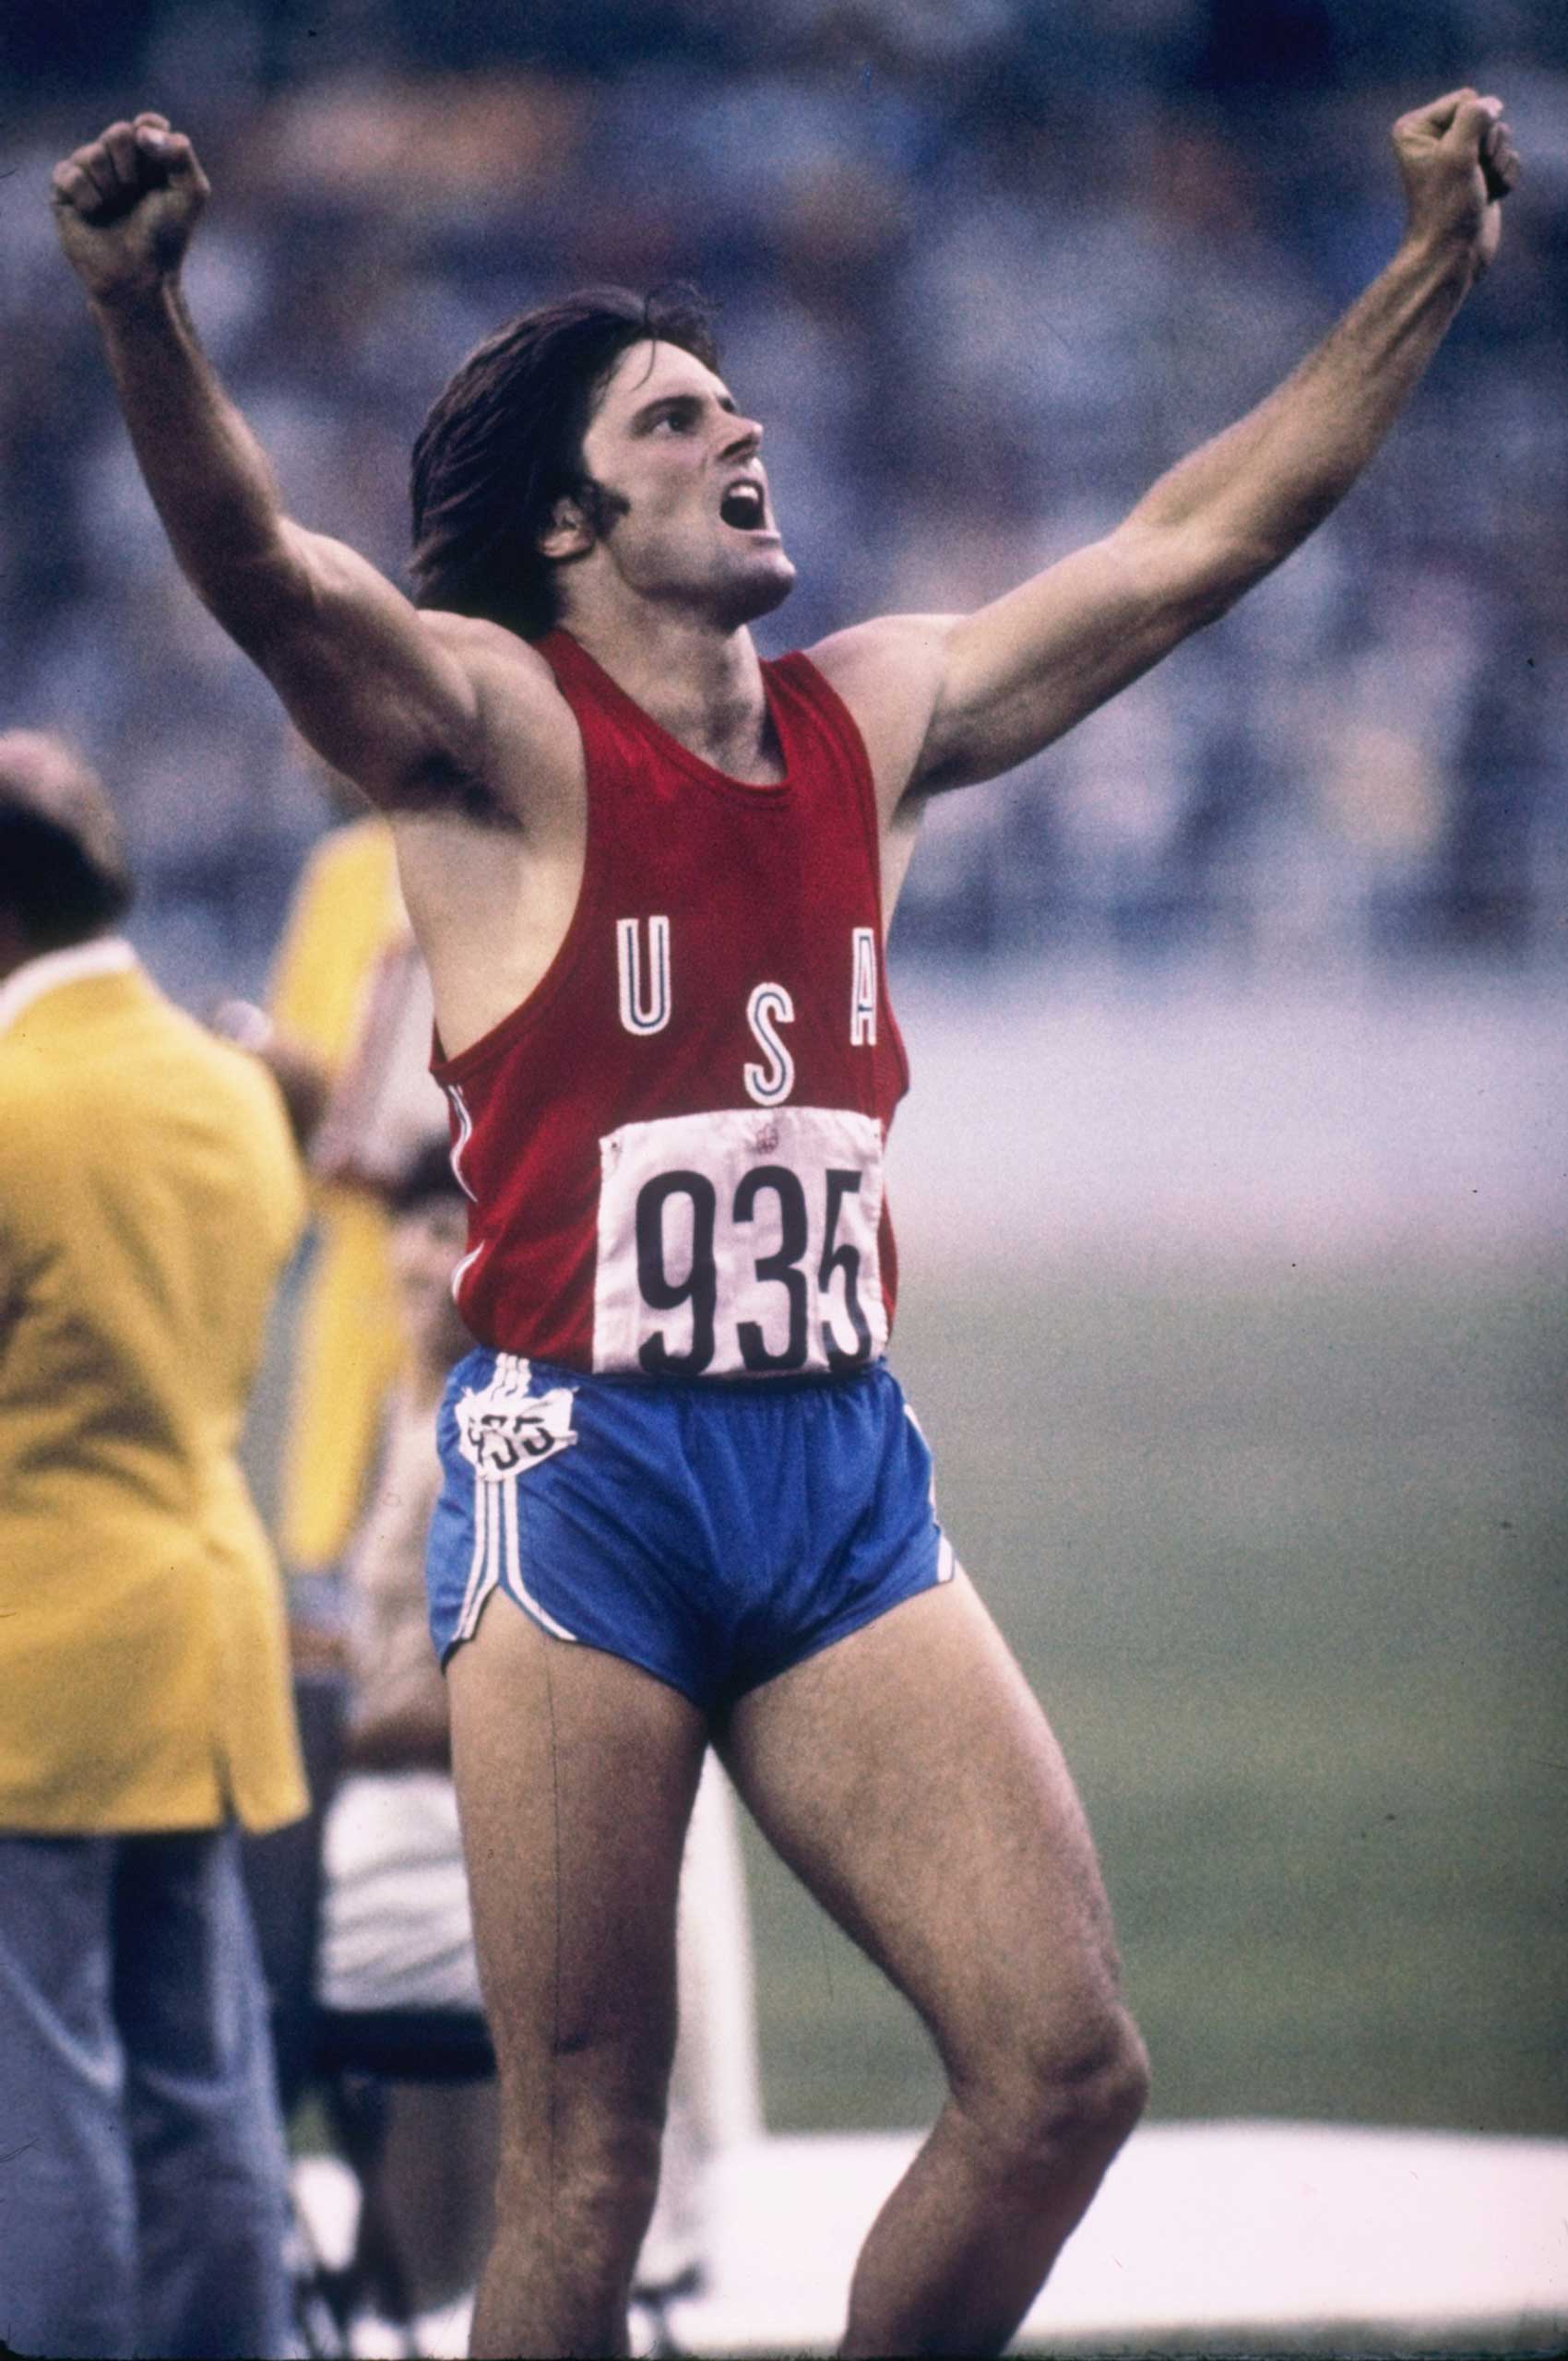 Bruce Jenner celebrates during his record setting performance in the decathlon in the 1976 Summer Olympics in Montreal.